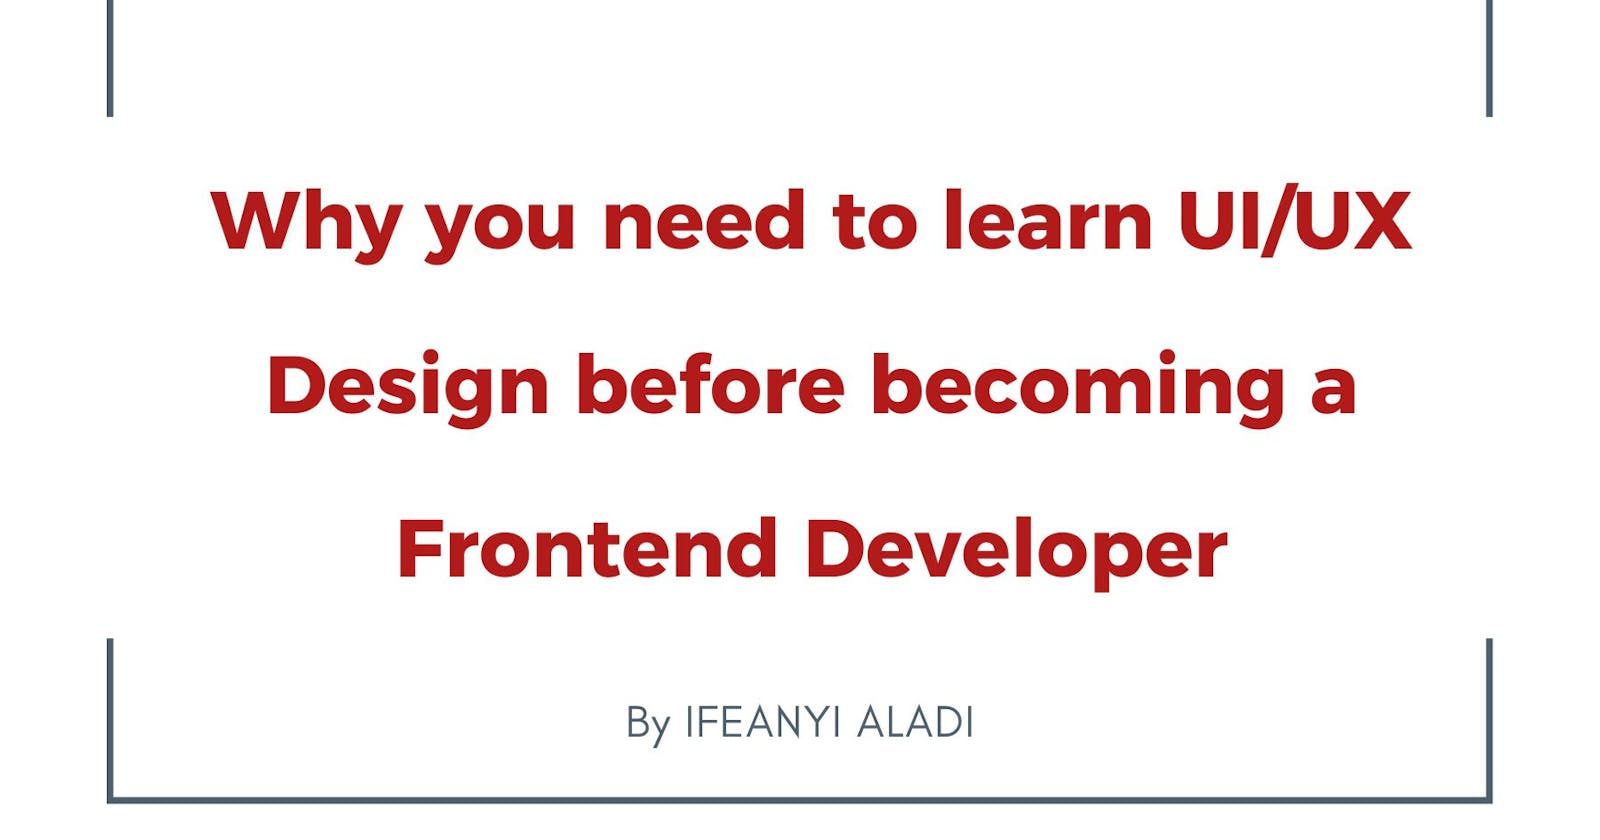 Why you need to learn UI/UX Design before becoming a Frontend Developer